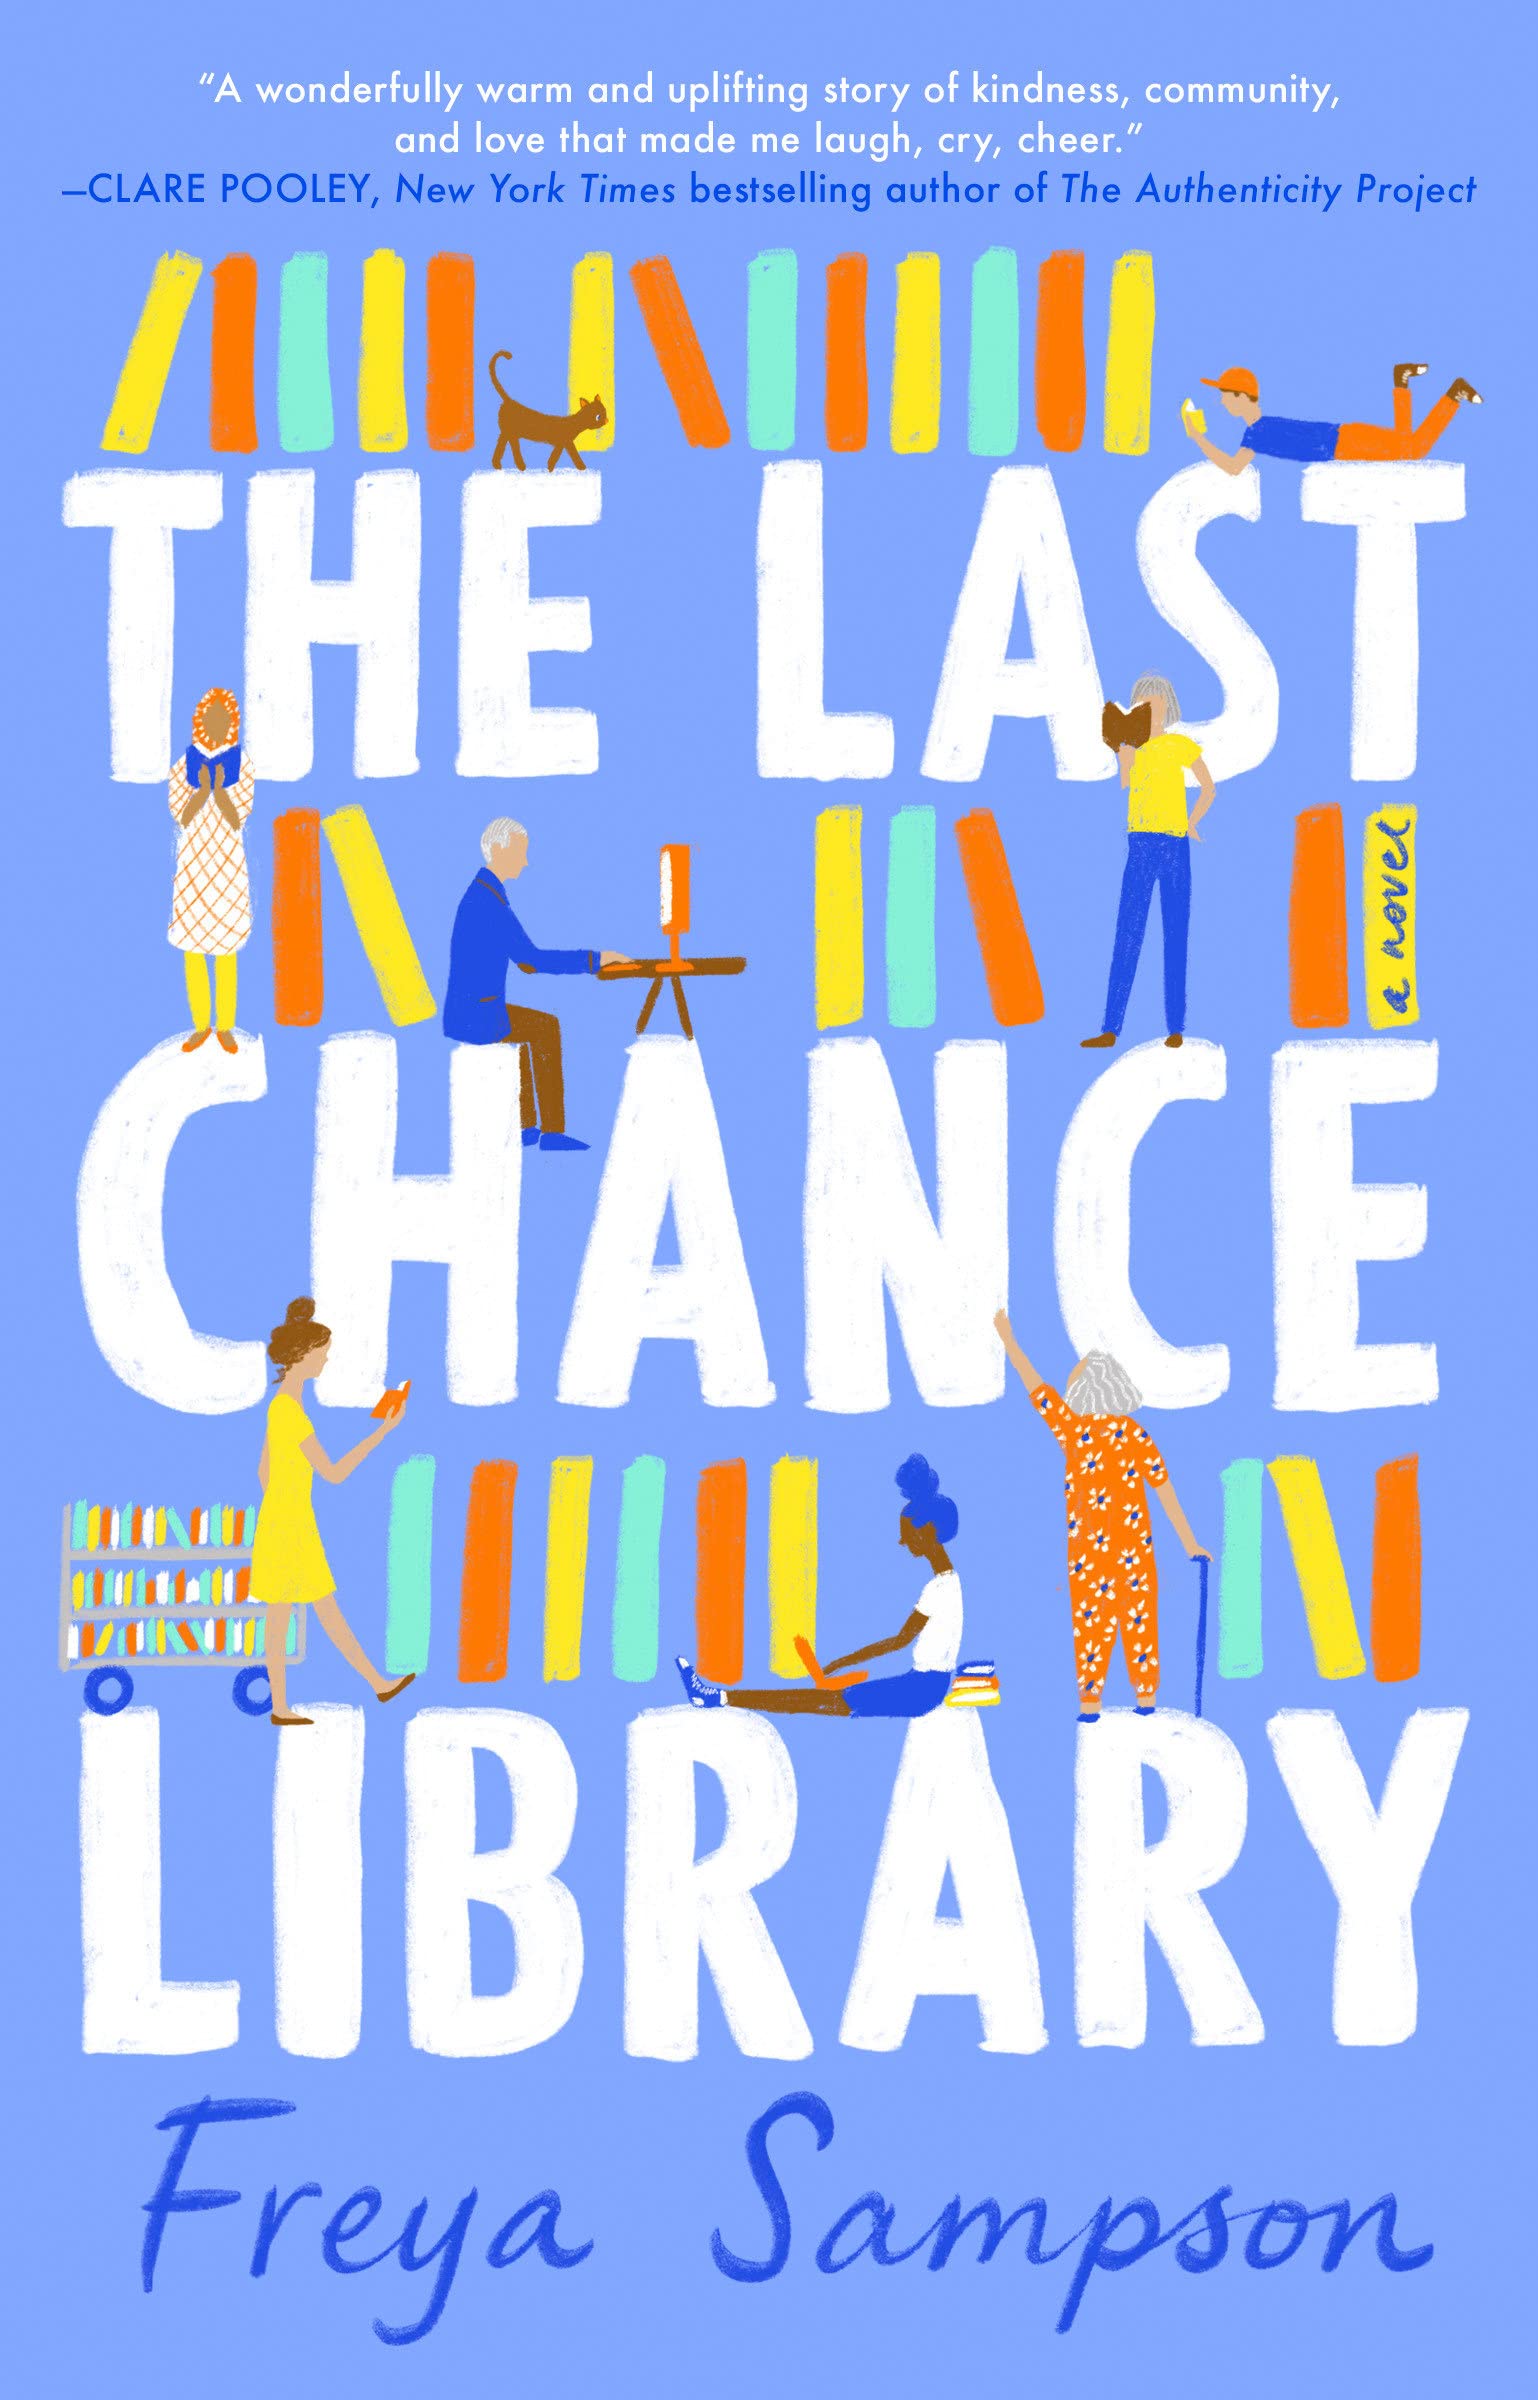 Graphic image of the cover of the novel The Last Chance Library